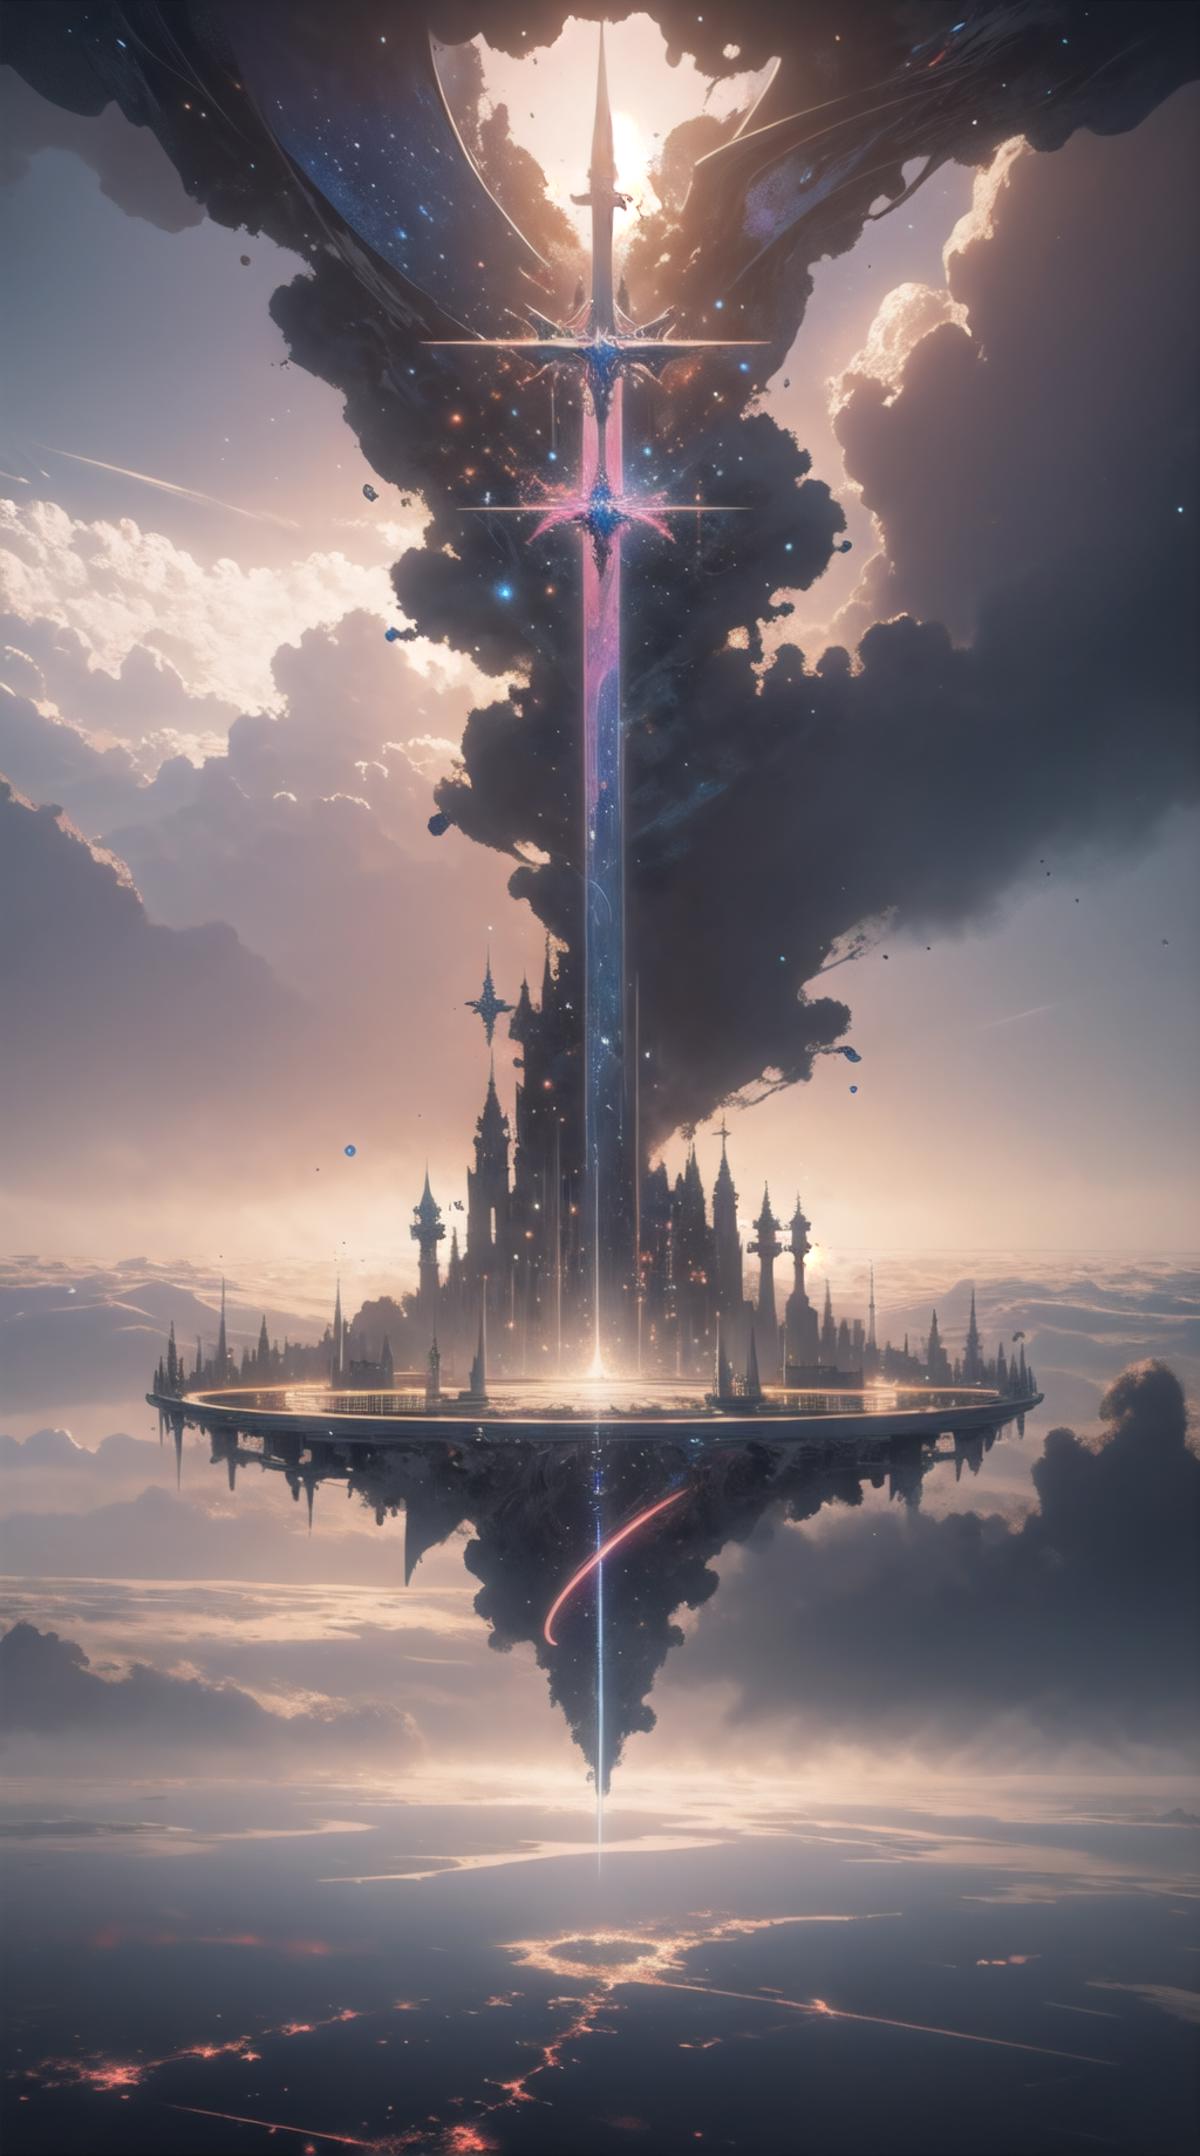 Fantasy Castle in the Sky with a Spire and a Light Beam